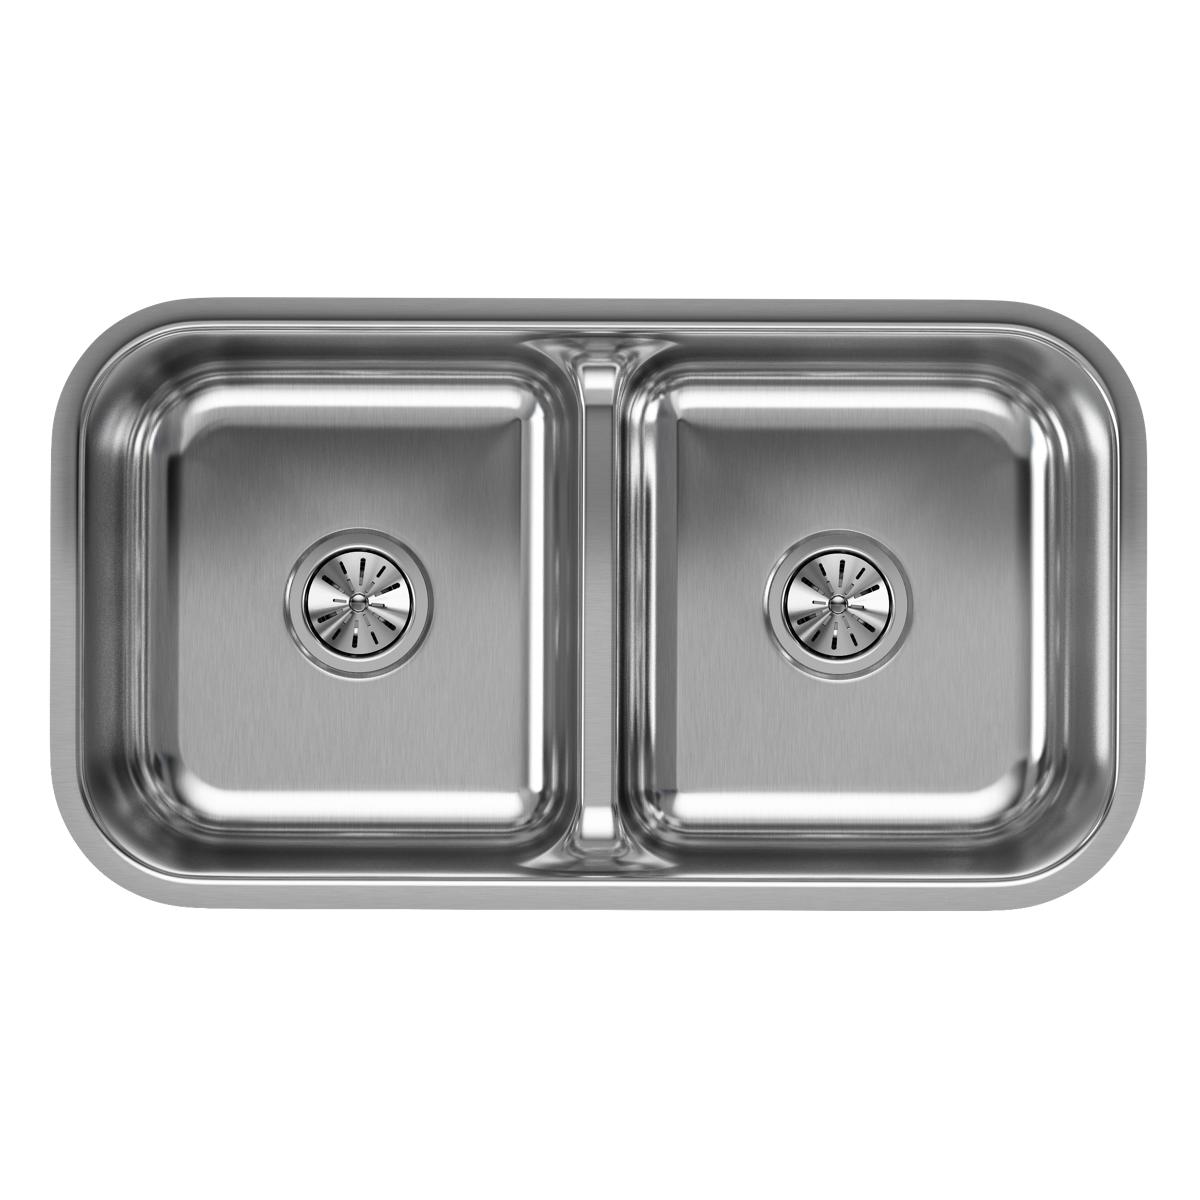 Elkay Lustertone Classic Stainless Steel 32-1/2" x 18-1/8" x 8" Equal Double Bowl Undermount Sink with Aqua Divide